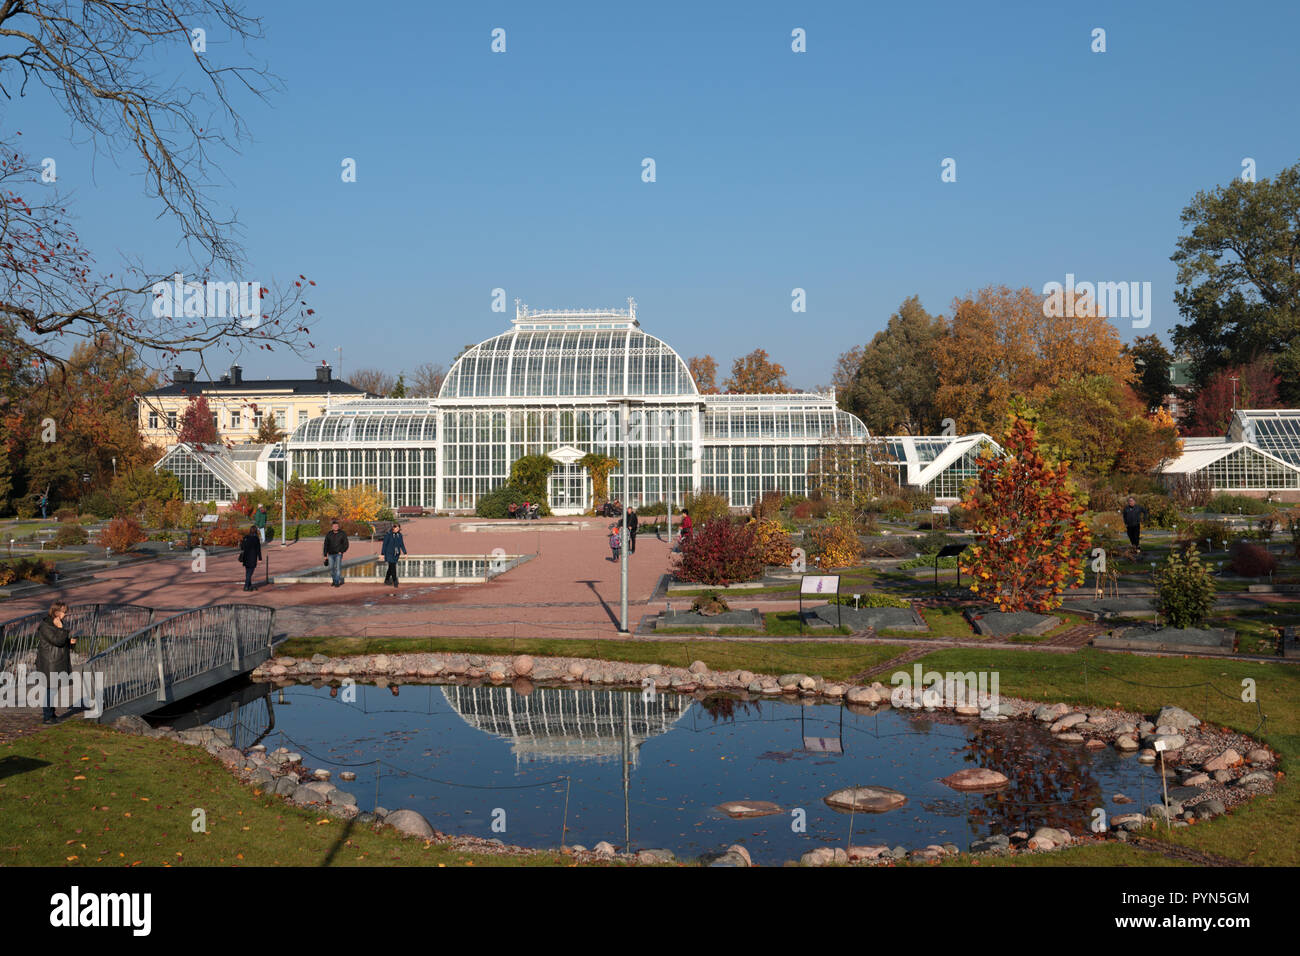 Helsinki, Finland - October 14, 2018: People walking and resting in Kaisaniemi botanic garden in front of Palm house. It was built in 1889 by design o Stock Photo